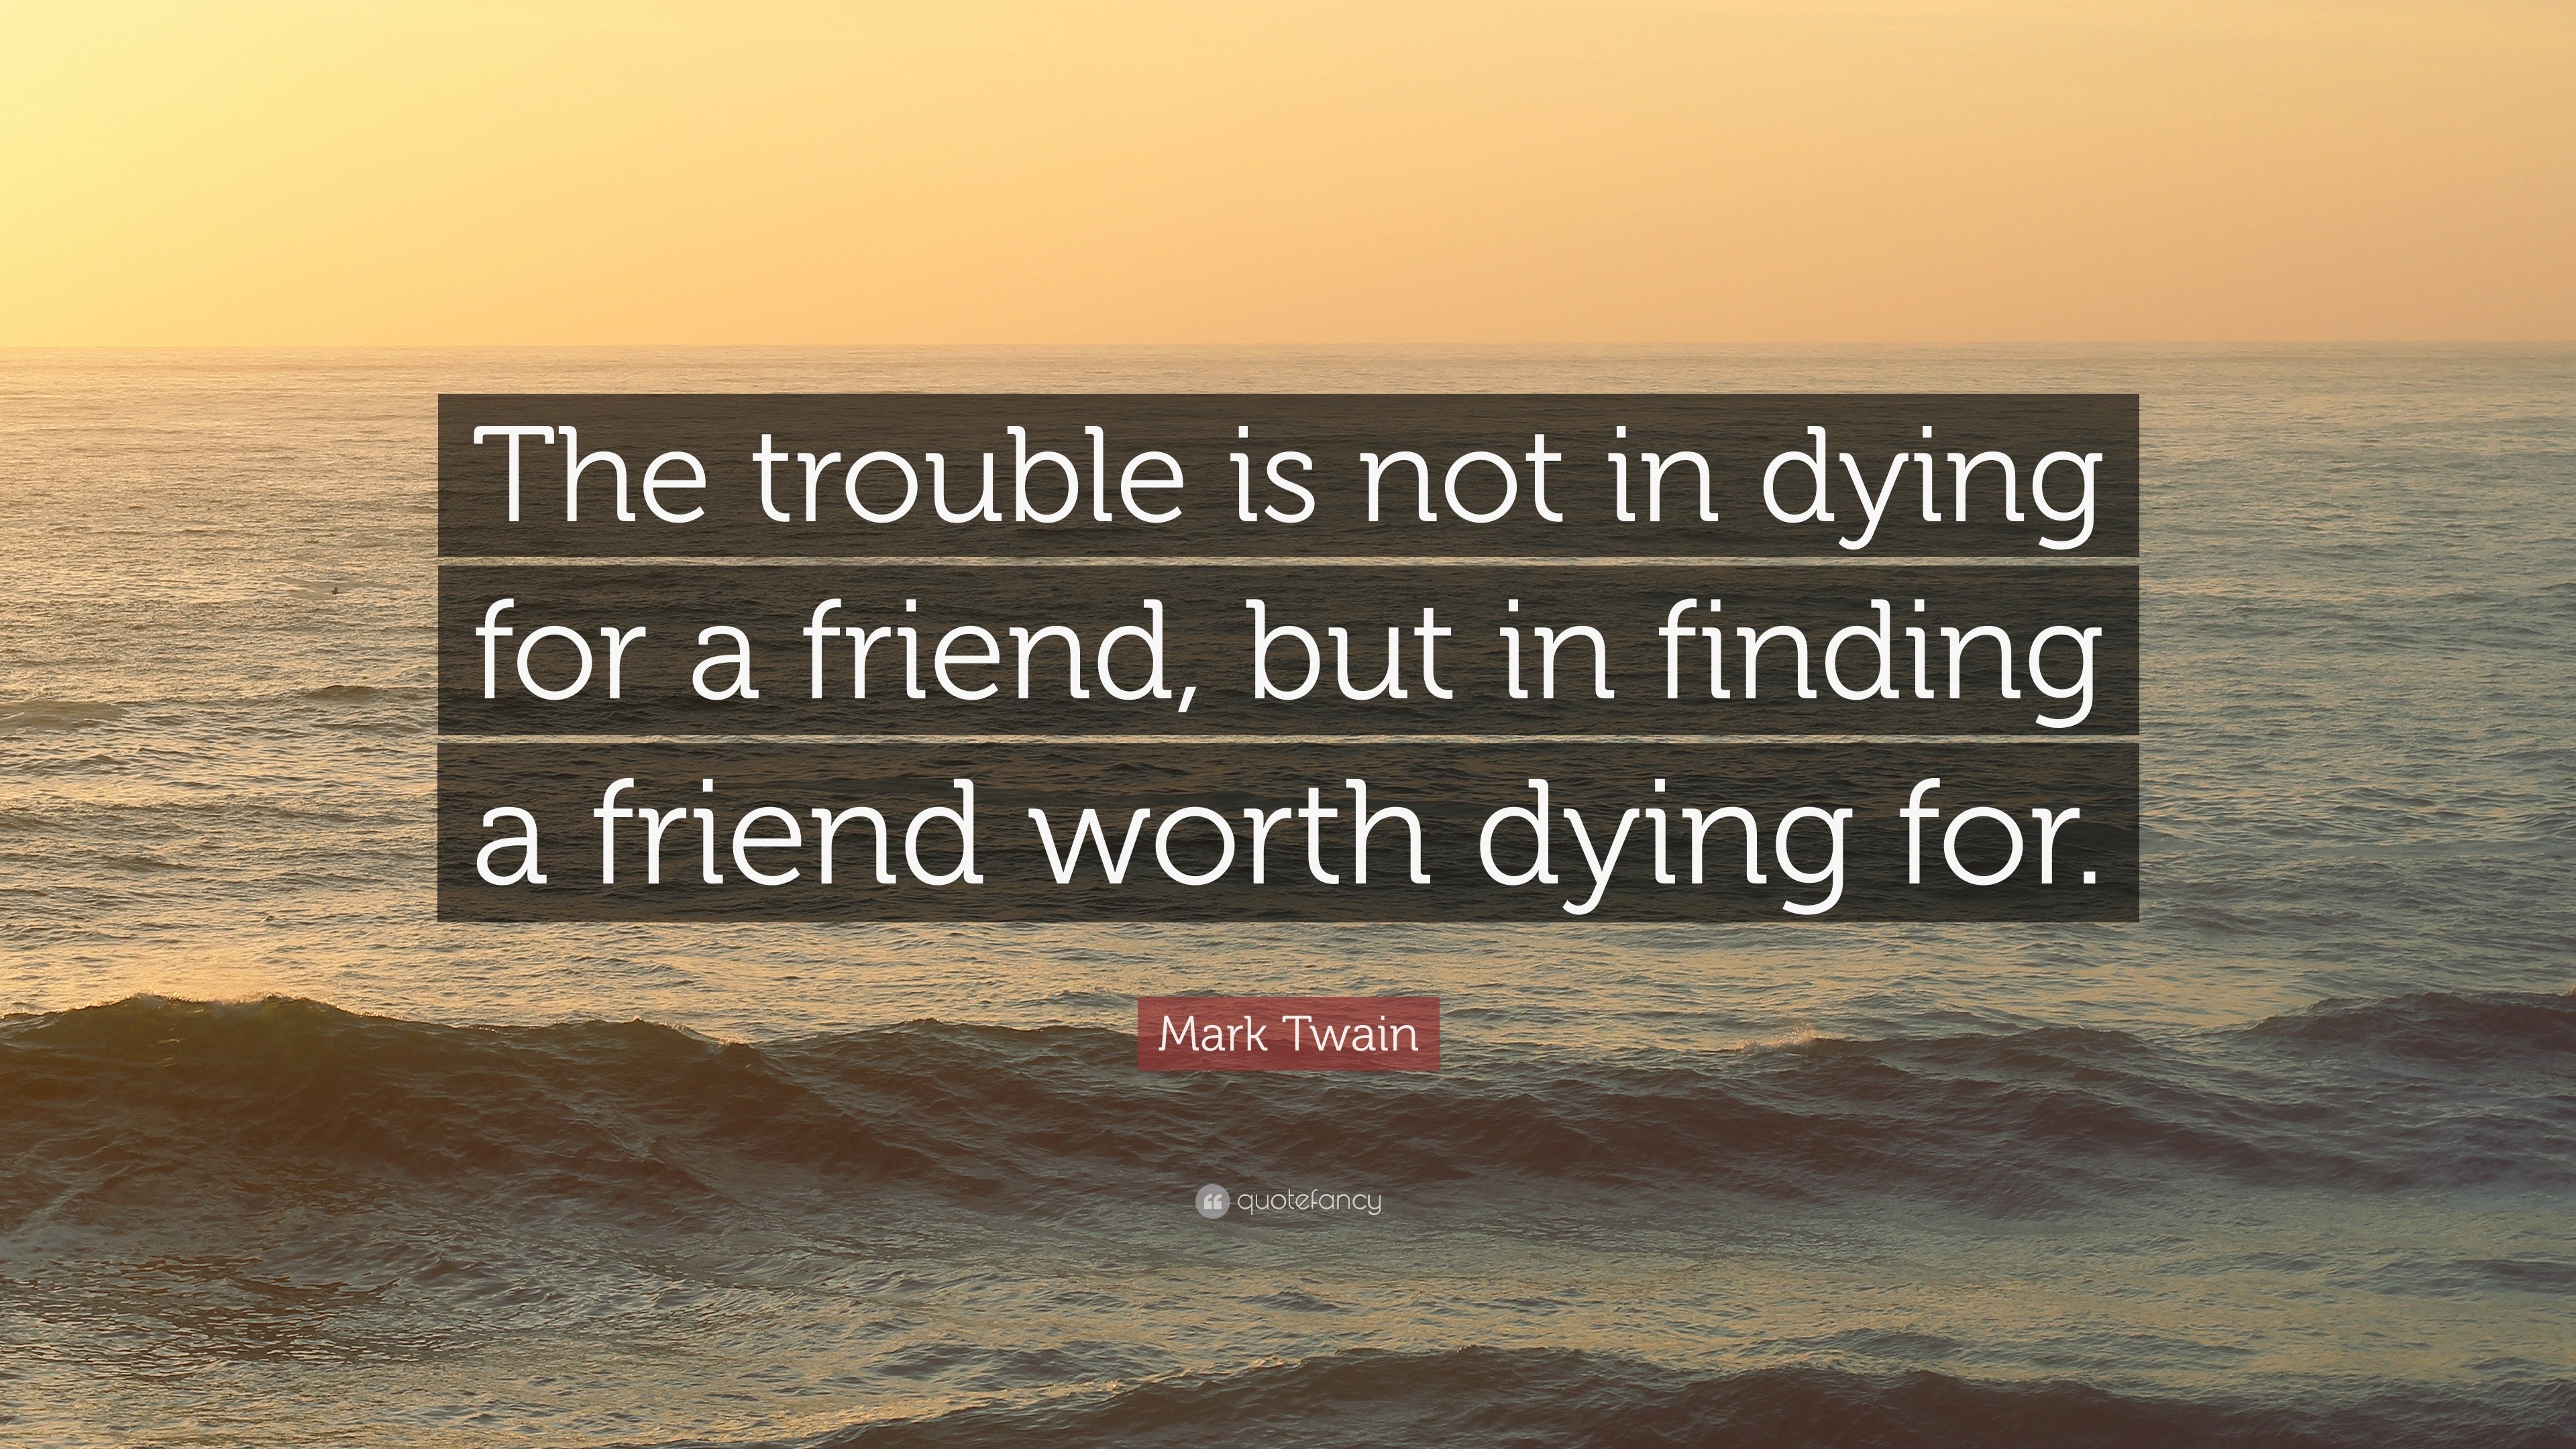 Mark Twain Quote: “The trouble is not in dying for a friend, but in